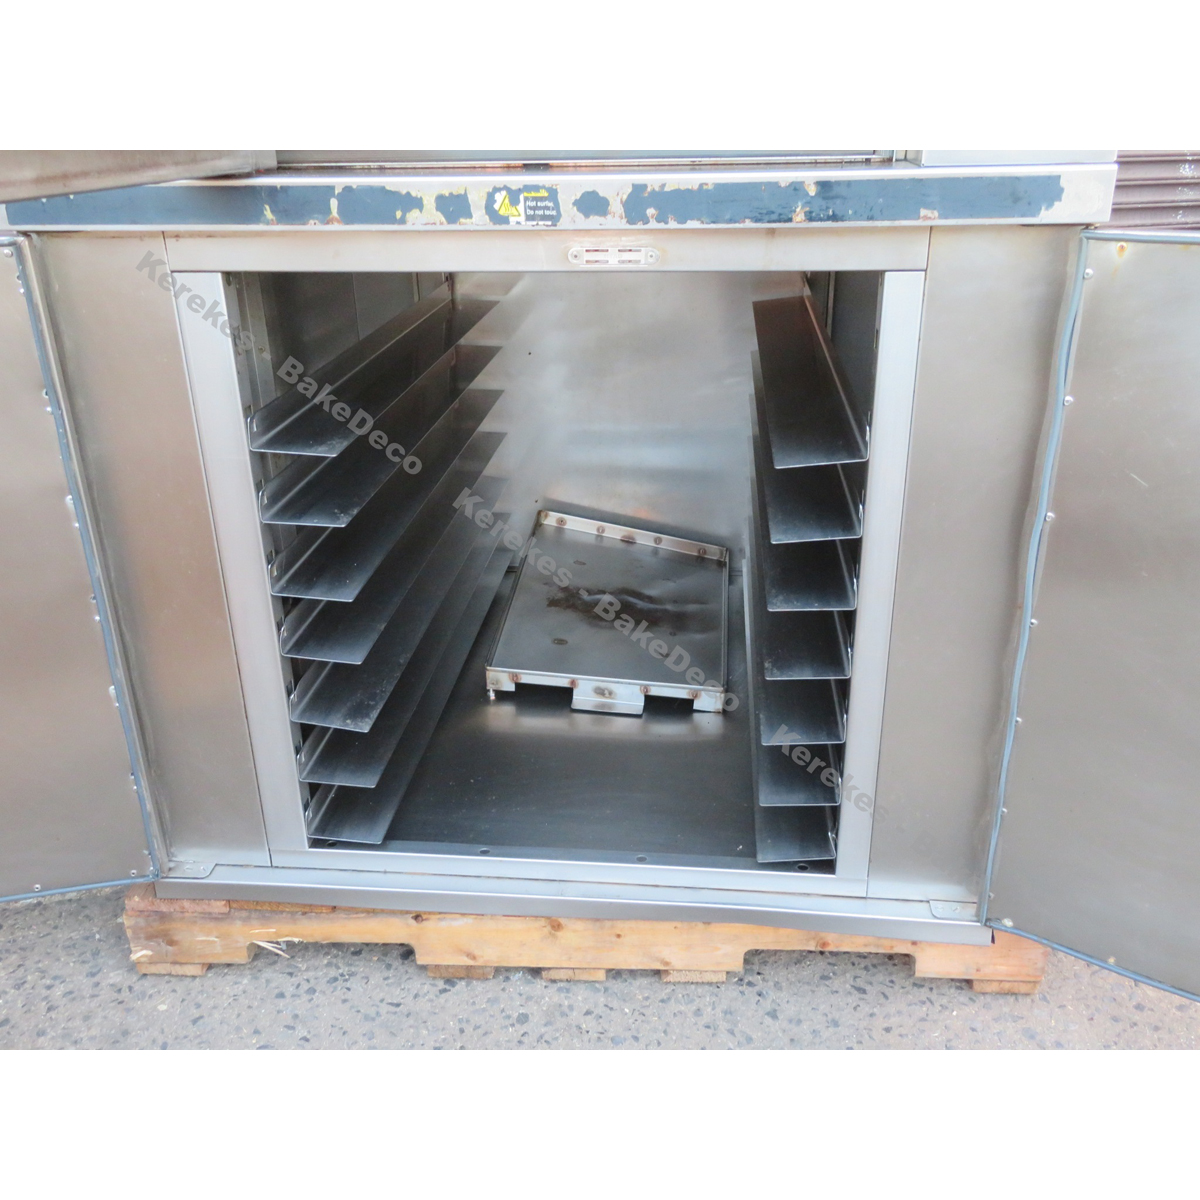 Revent 739 Mini Rack Oven W/Proofer, Used Good Condition image 3